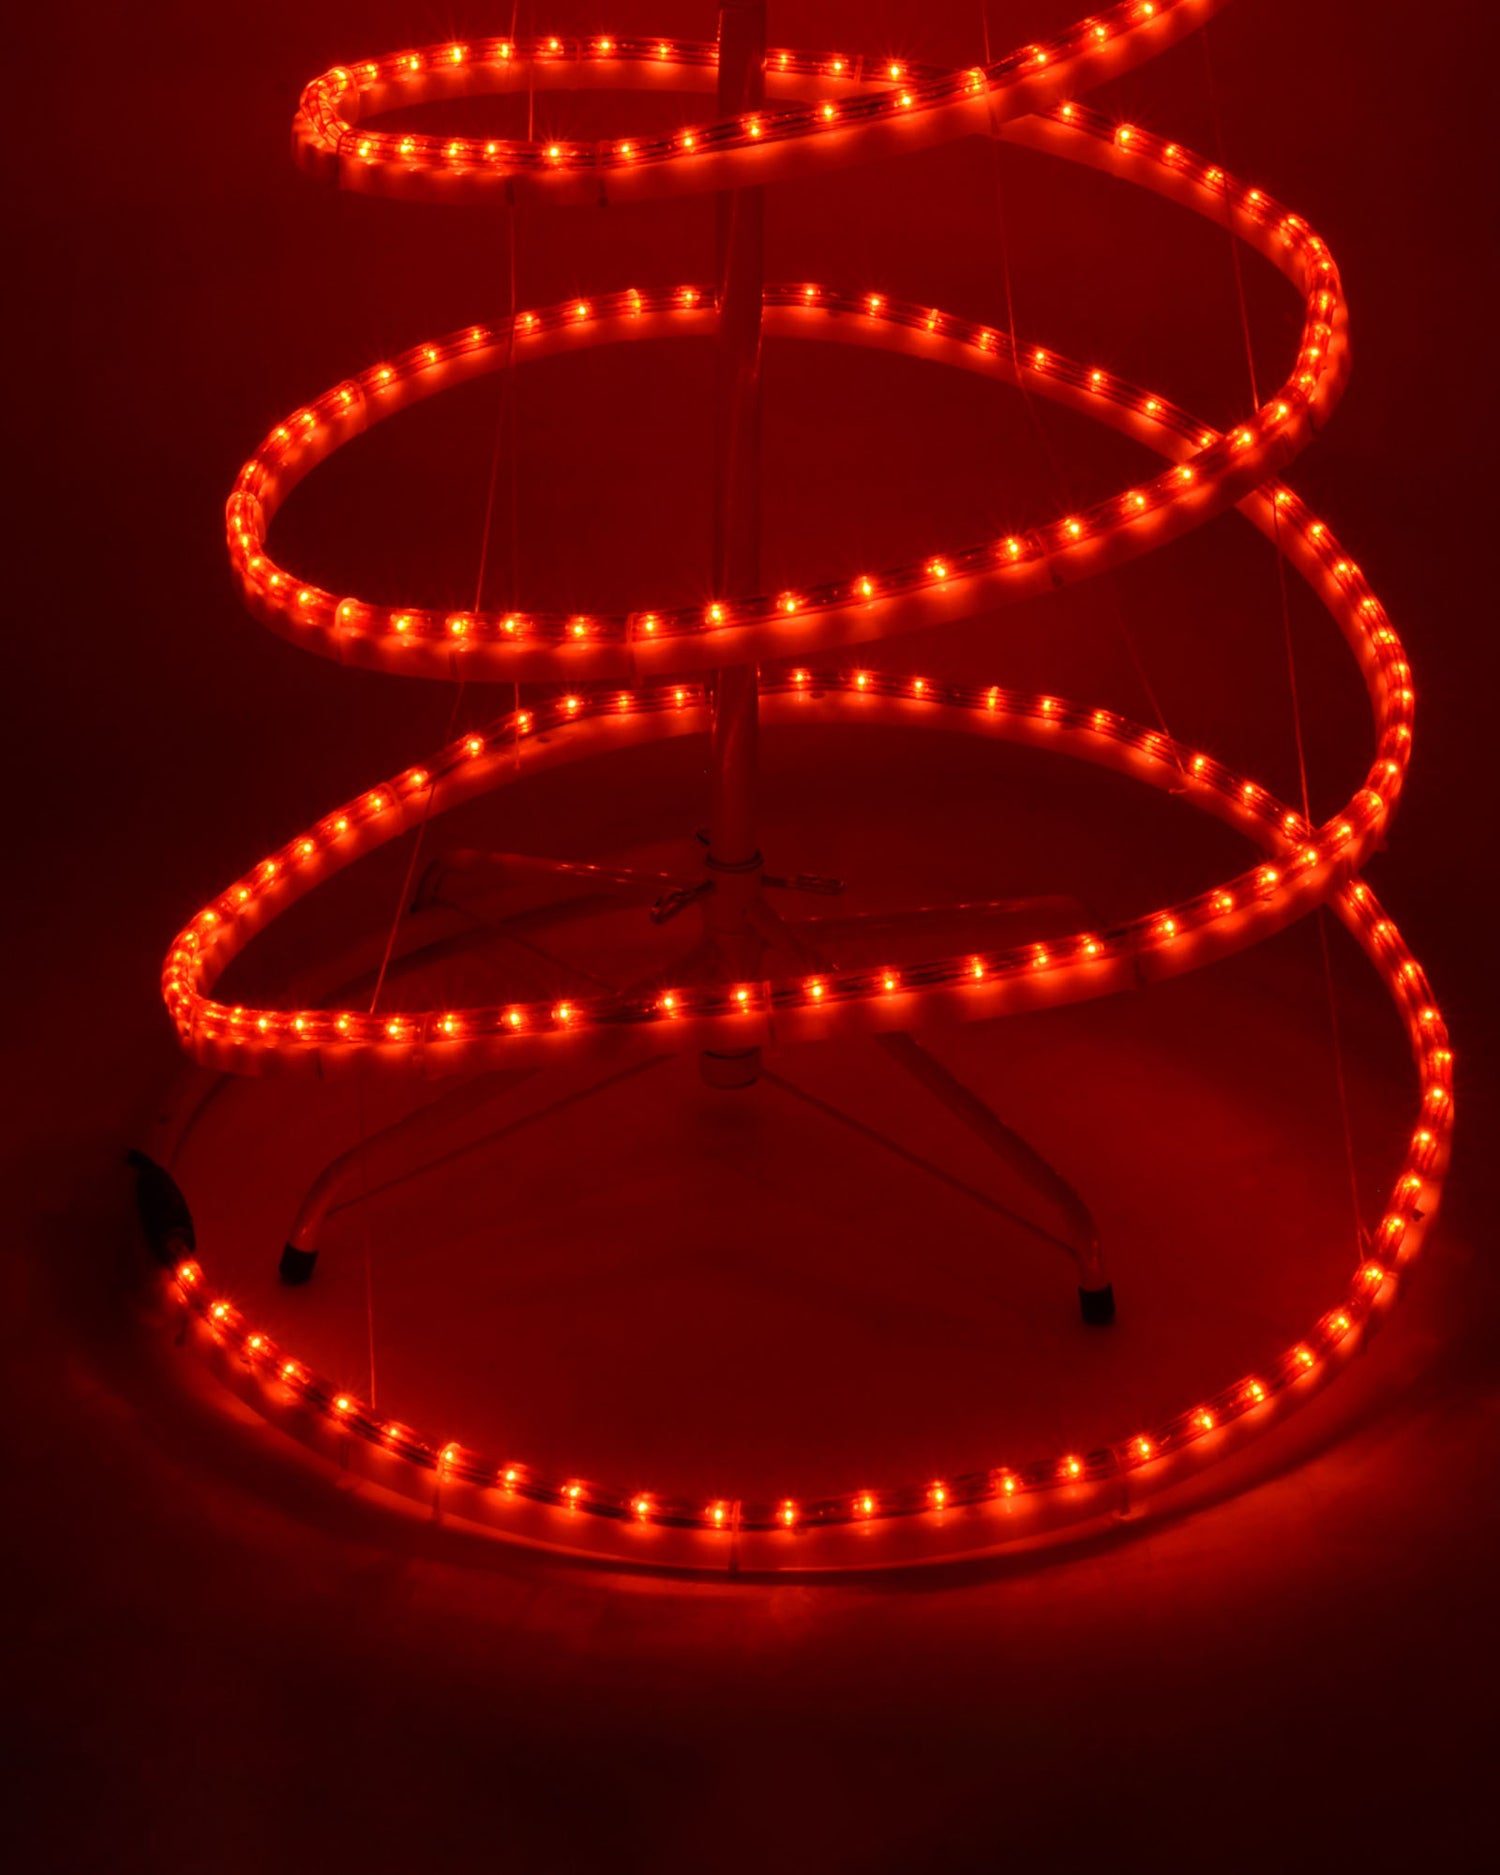 3d Spiral Christmas Tree Rope Light Silhouette 5 Ft We R Christmas 